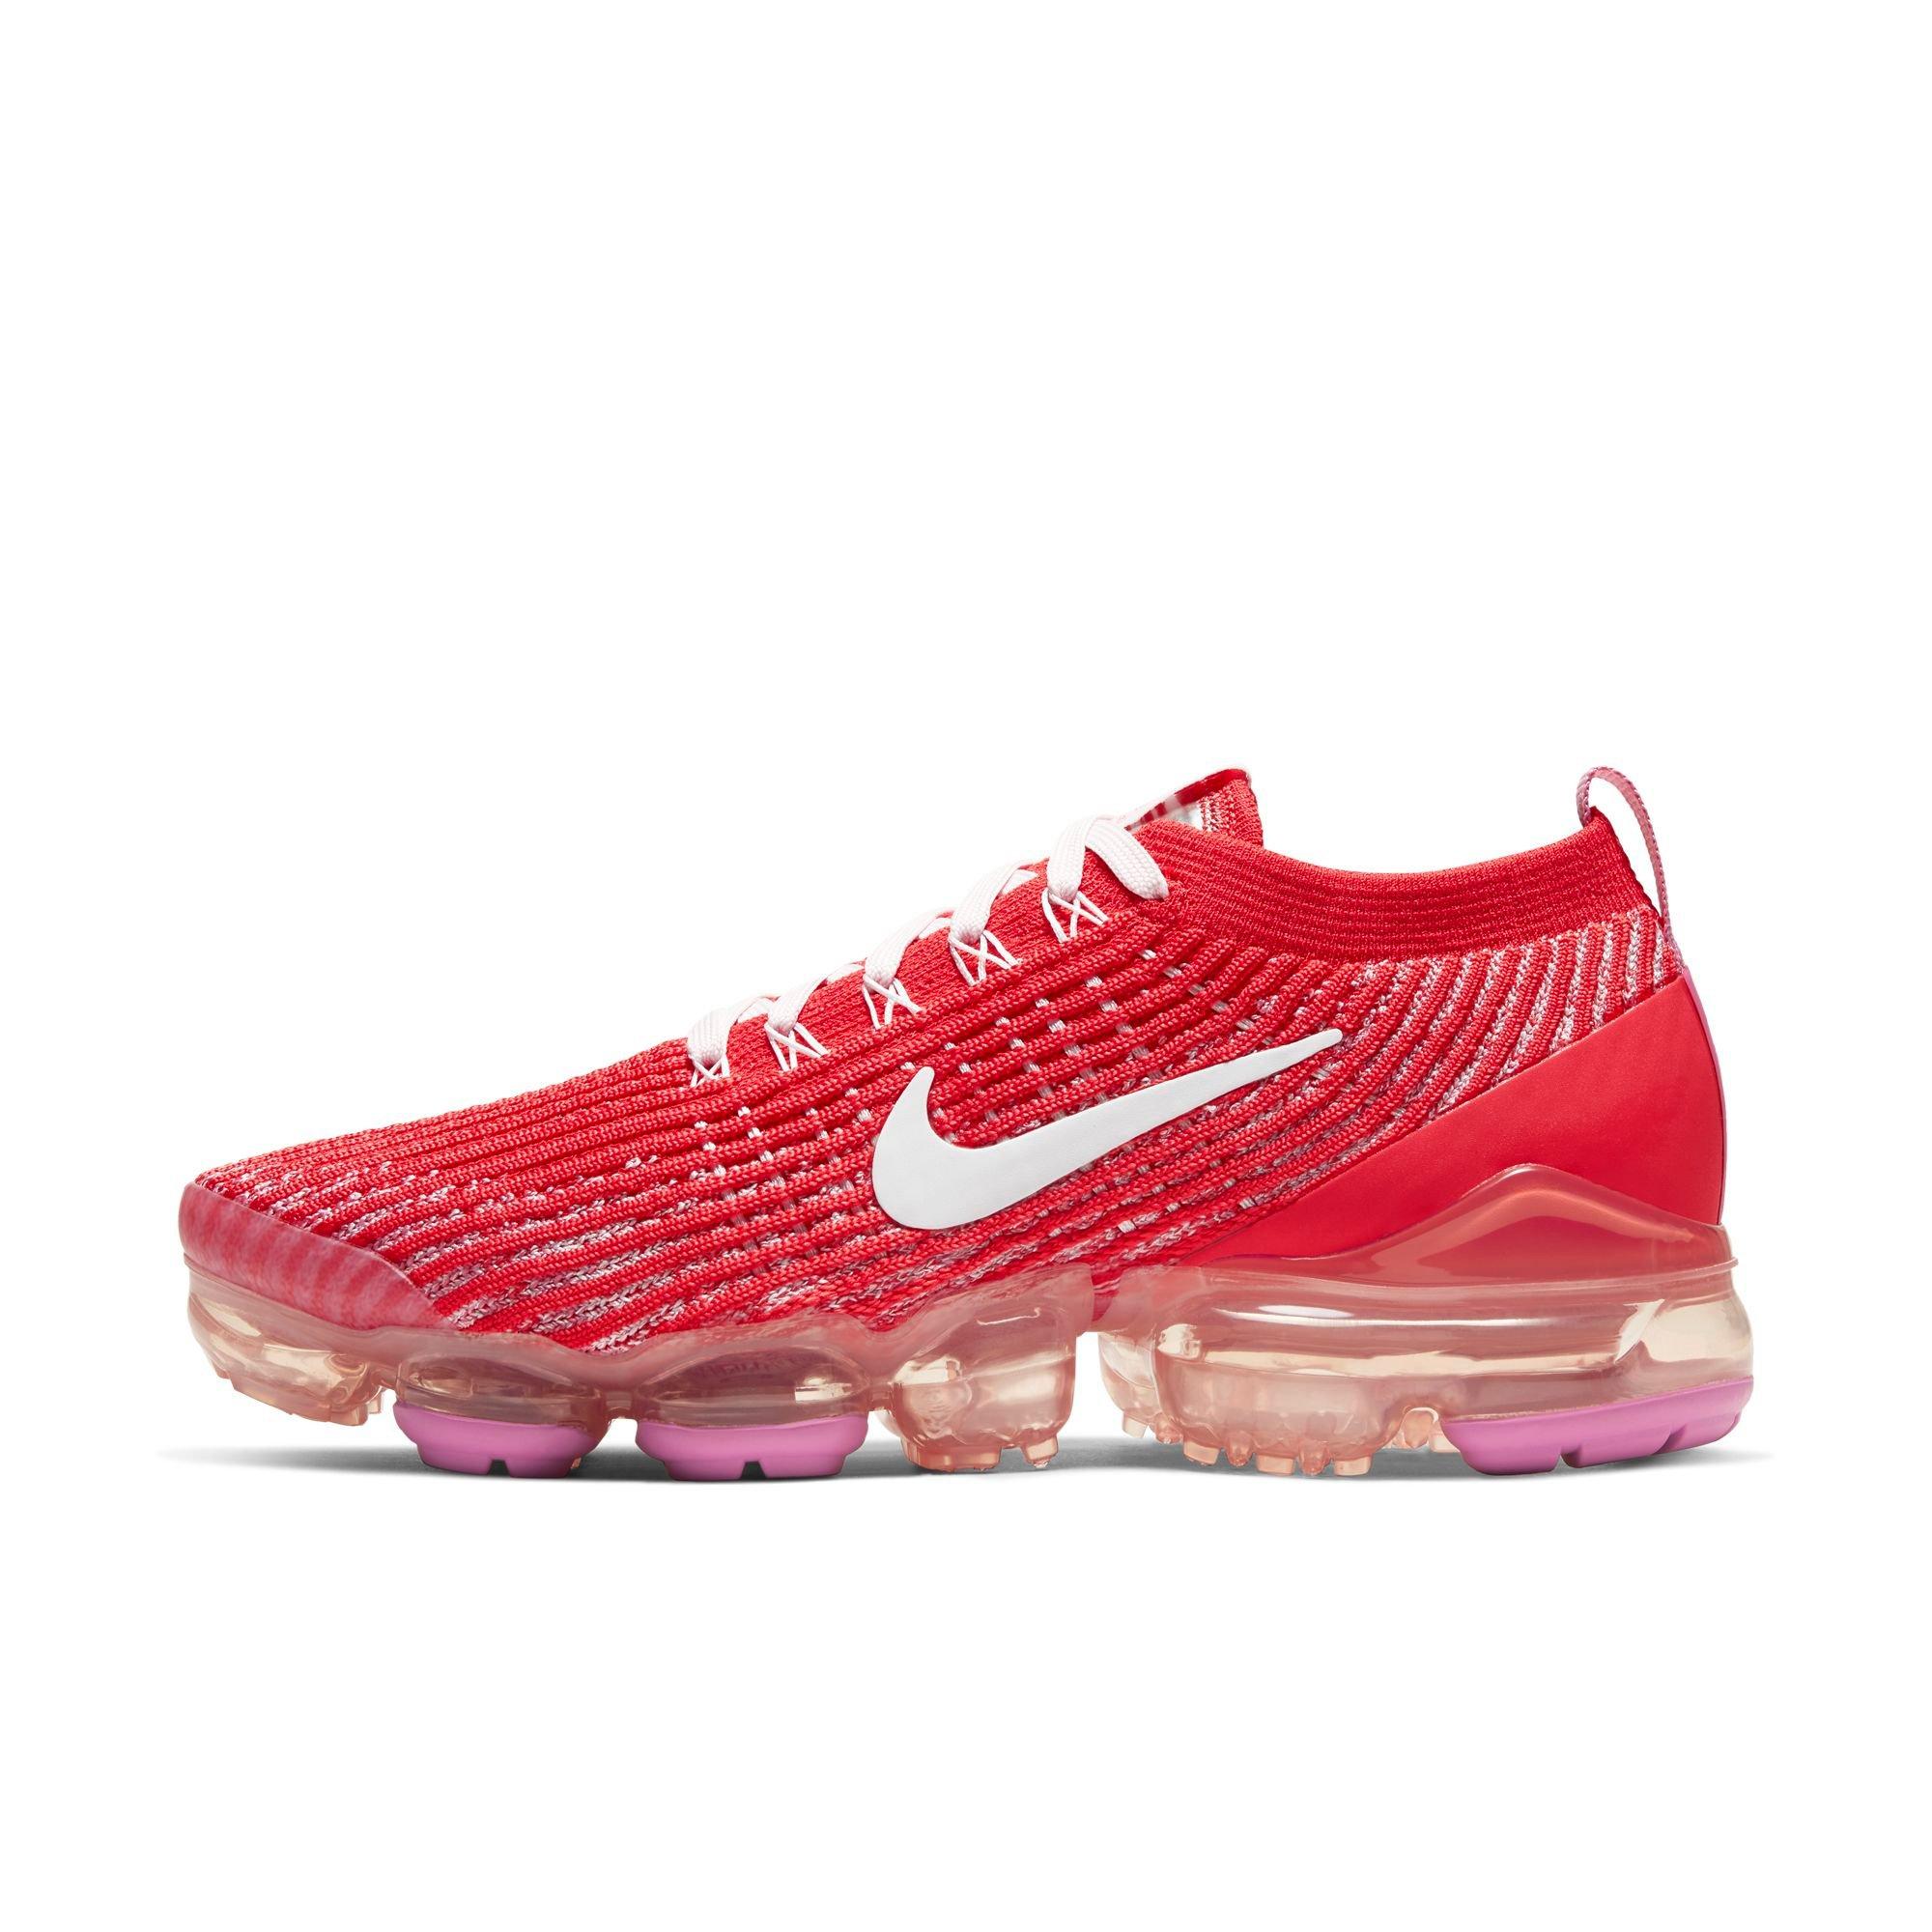 vapormax pink and red